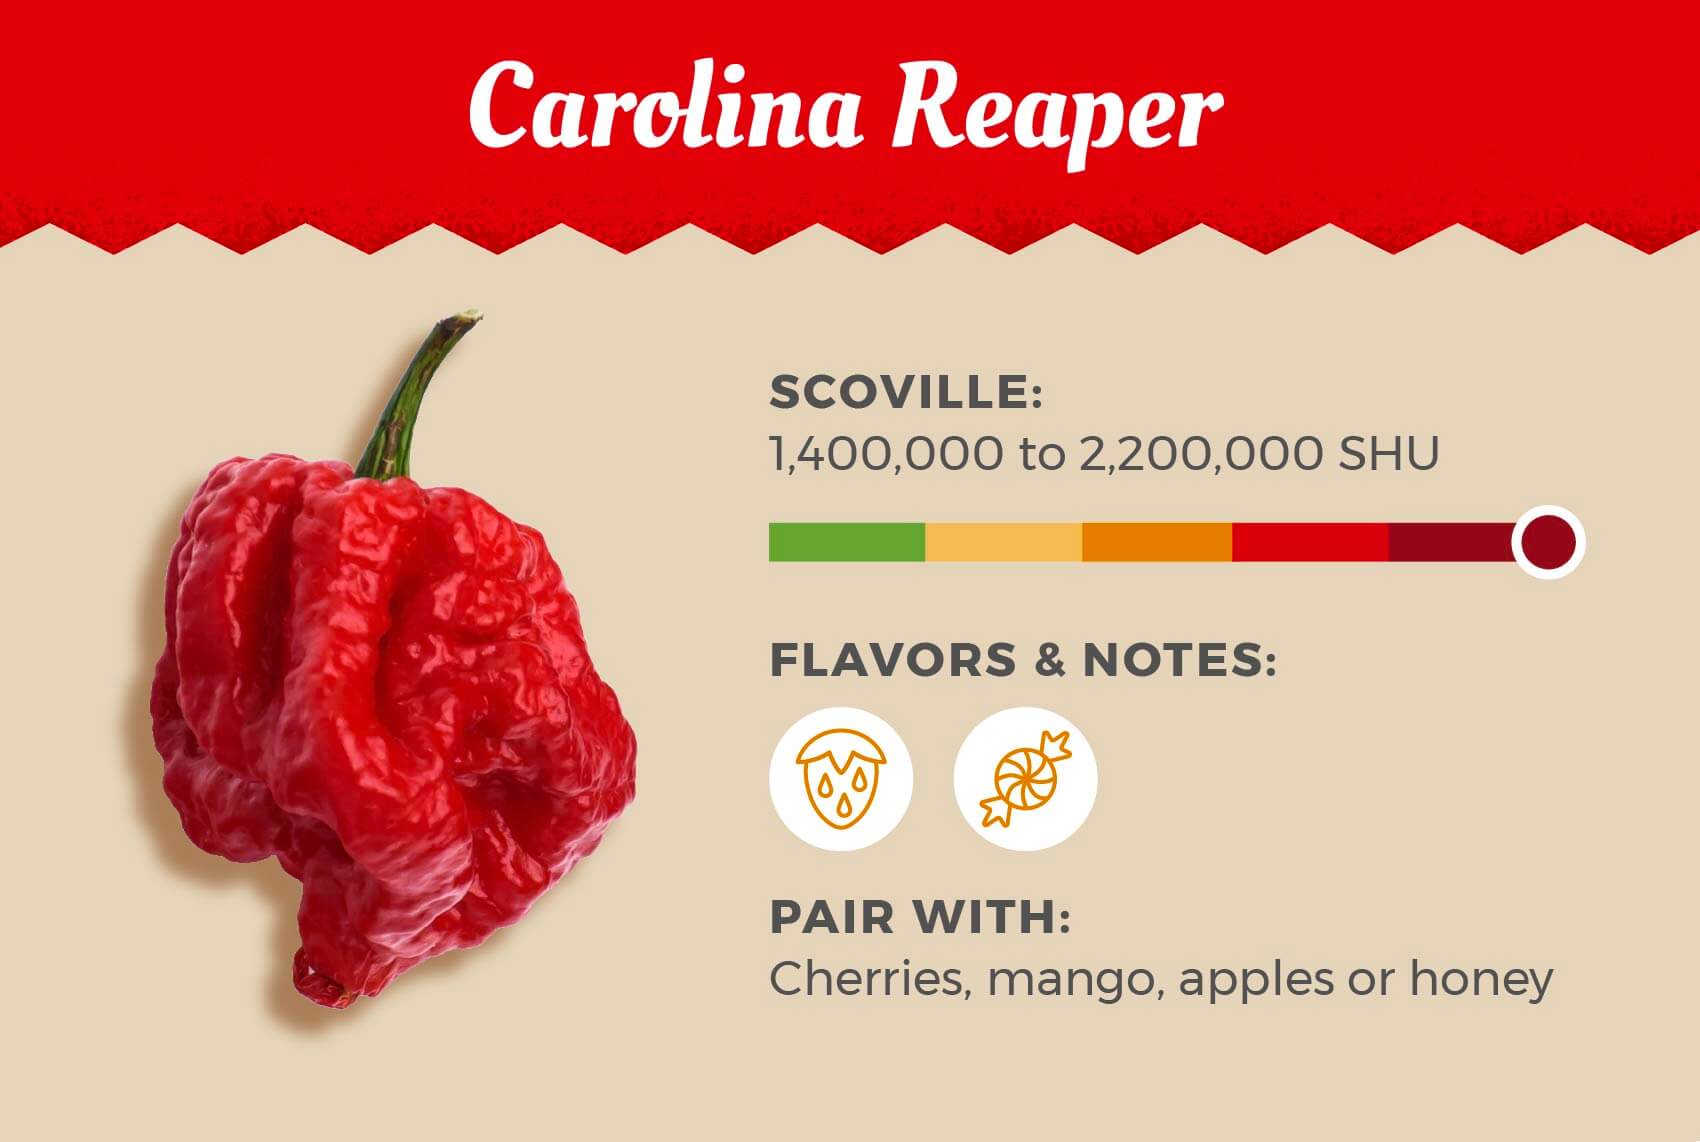 Carolina Reaper is the #1 hottest pepper on this list with a high score of 2.2 million Scoville heat units, pair with cherries, mango or honey.